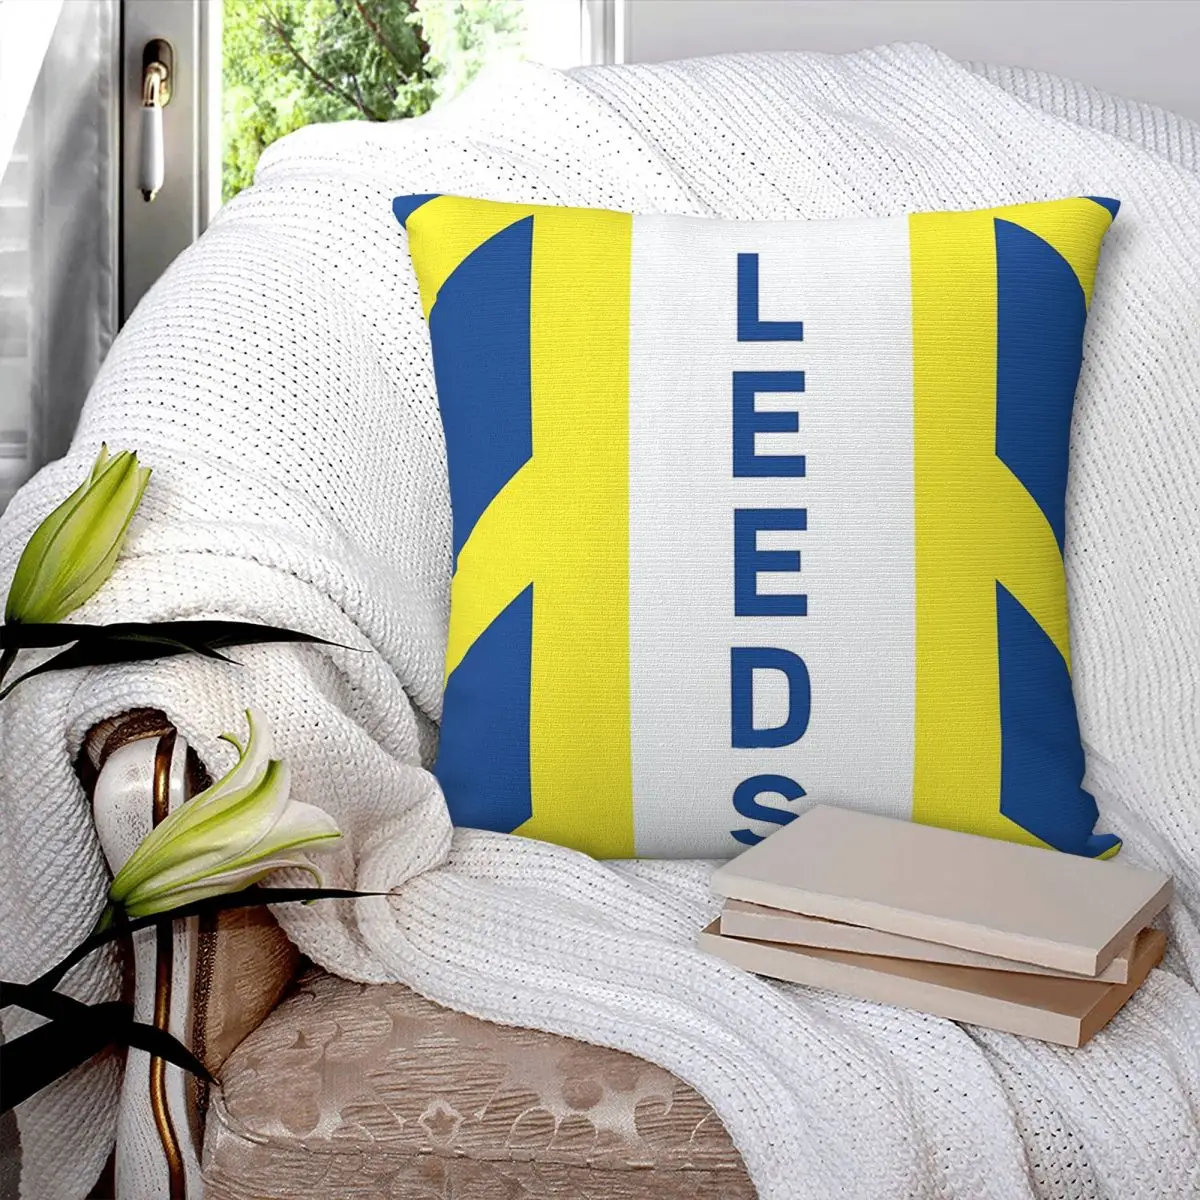 

Leeds United Square Pillowcase Pillow Cover Polyester Cushion Decor Comfort Throw Pillow for Home Car